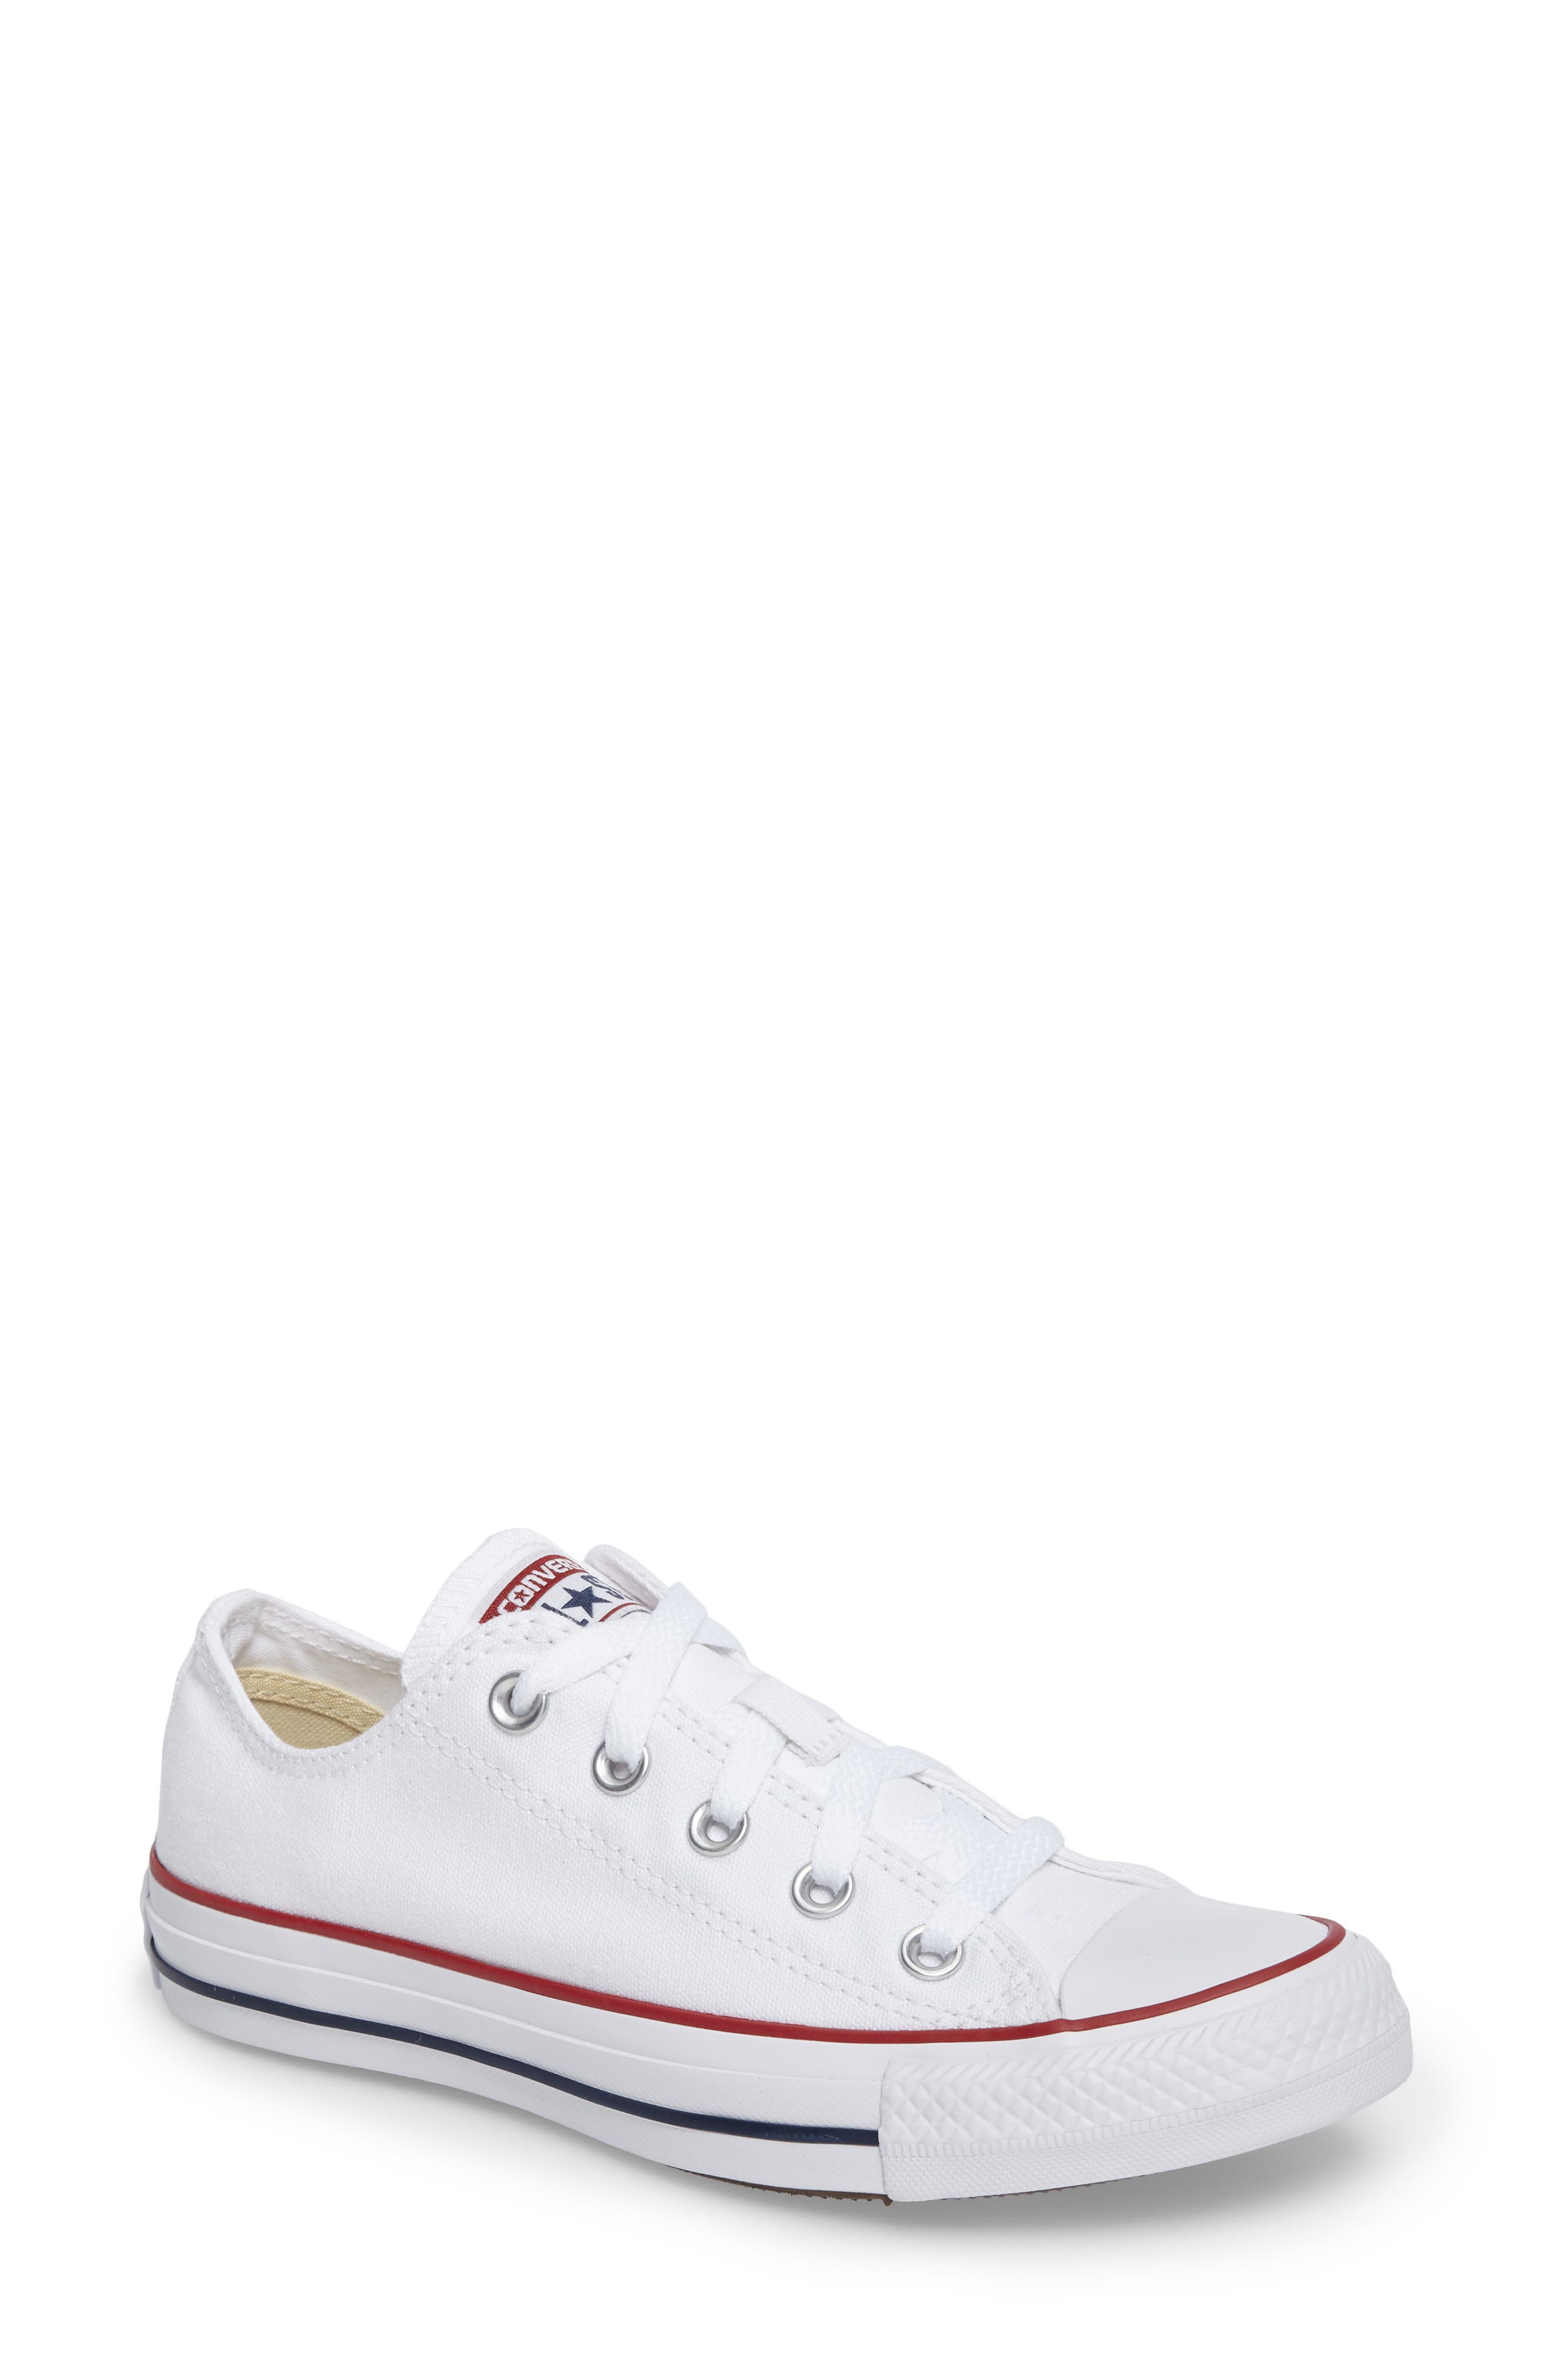 converse mid rise